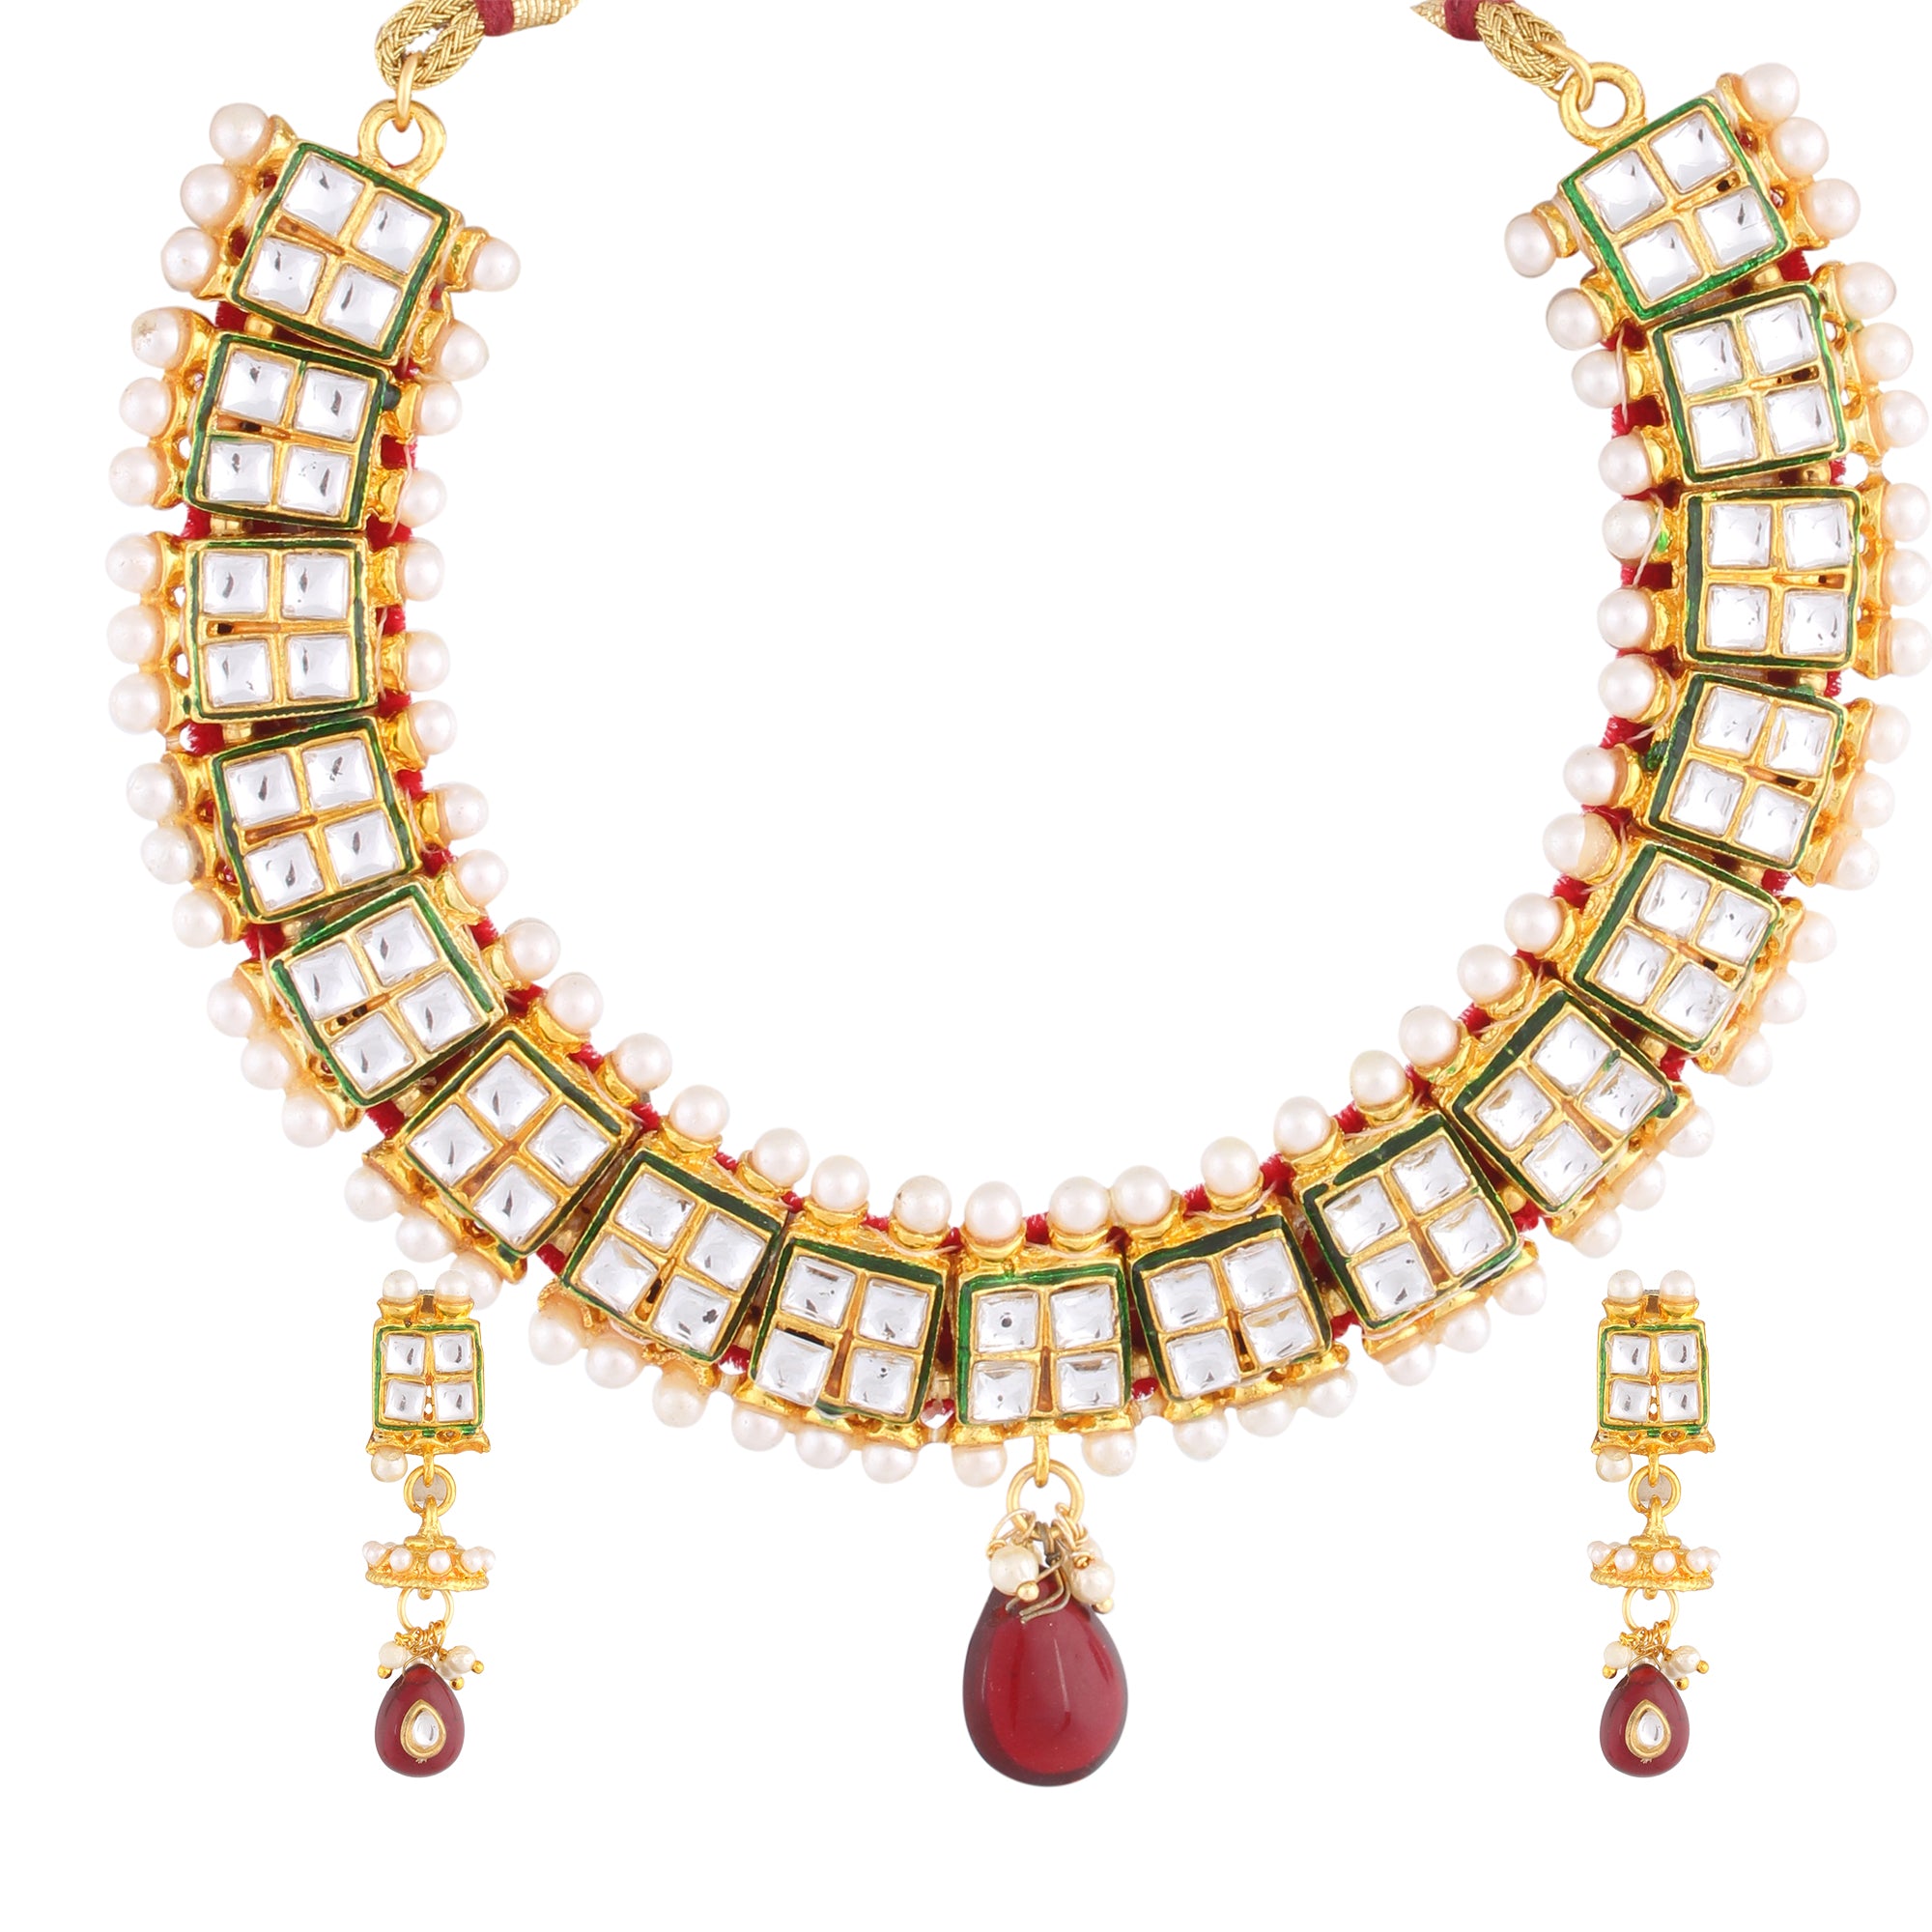 KUNDAN CHOKER NECKLACE SET WITH TEAR DROP PENDENT & MATCHING EARRING FOR WOMEN